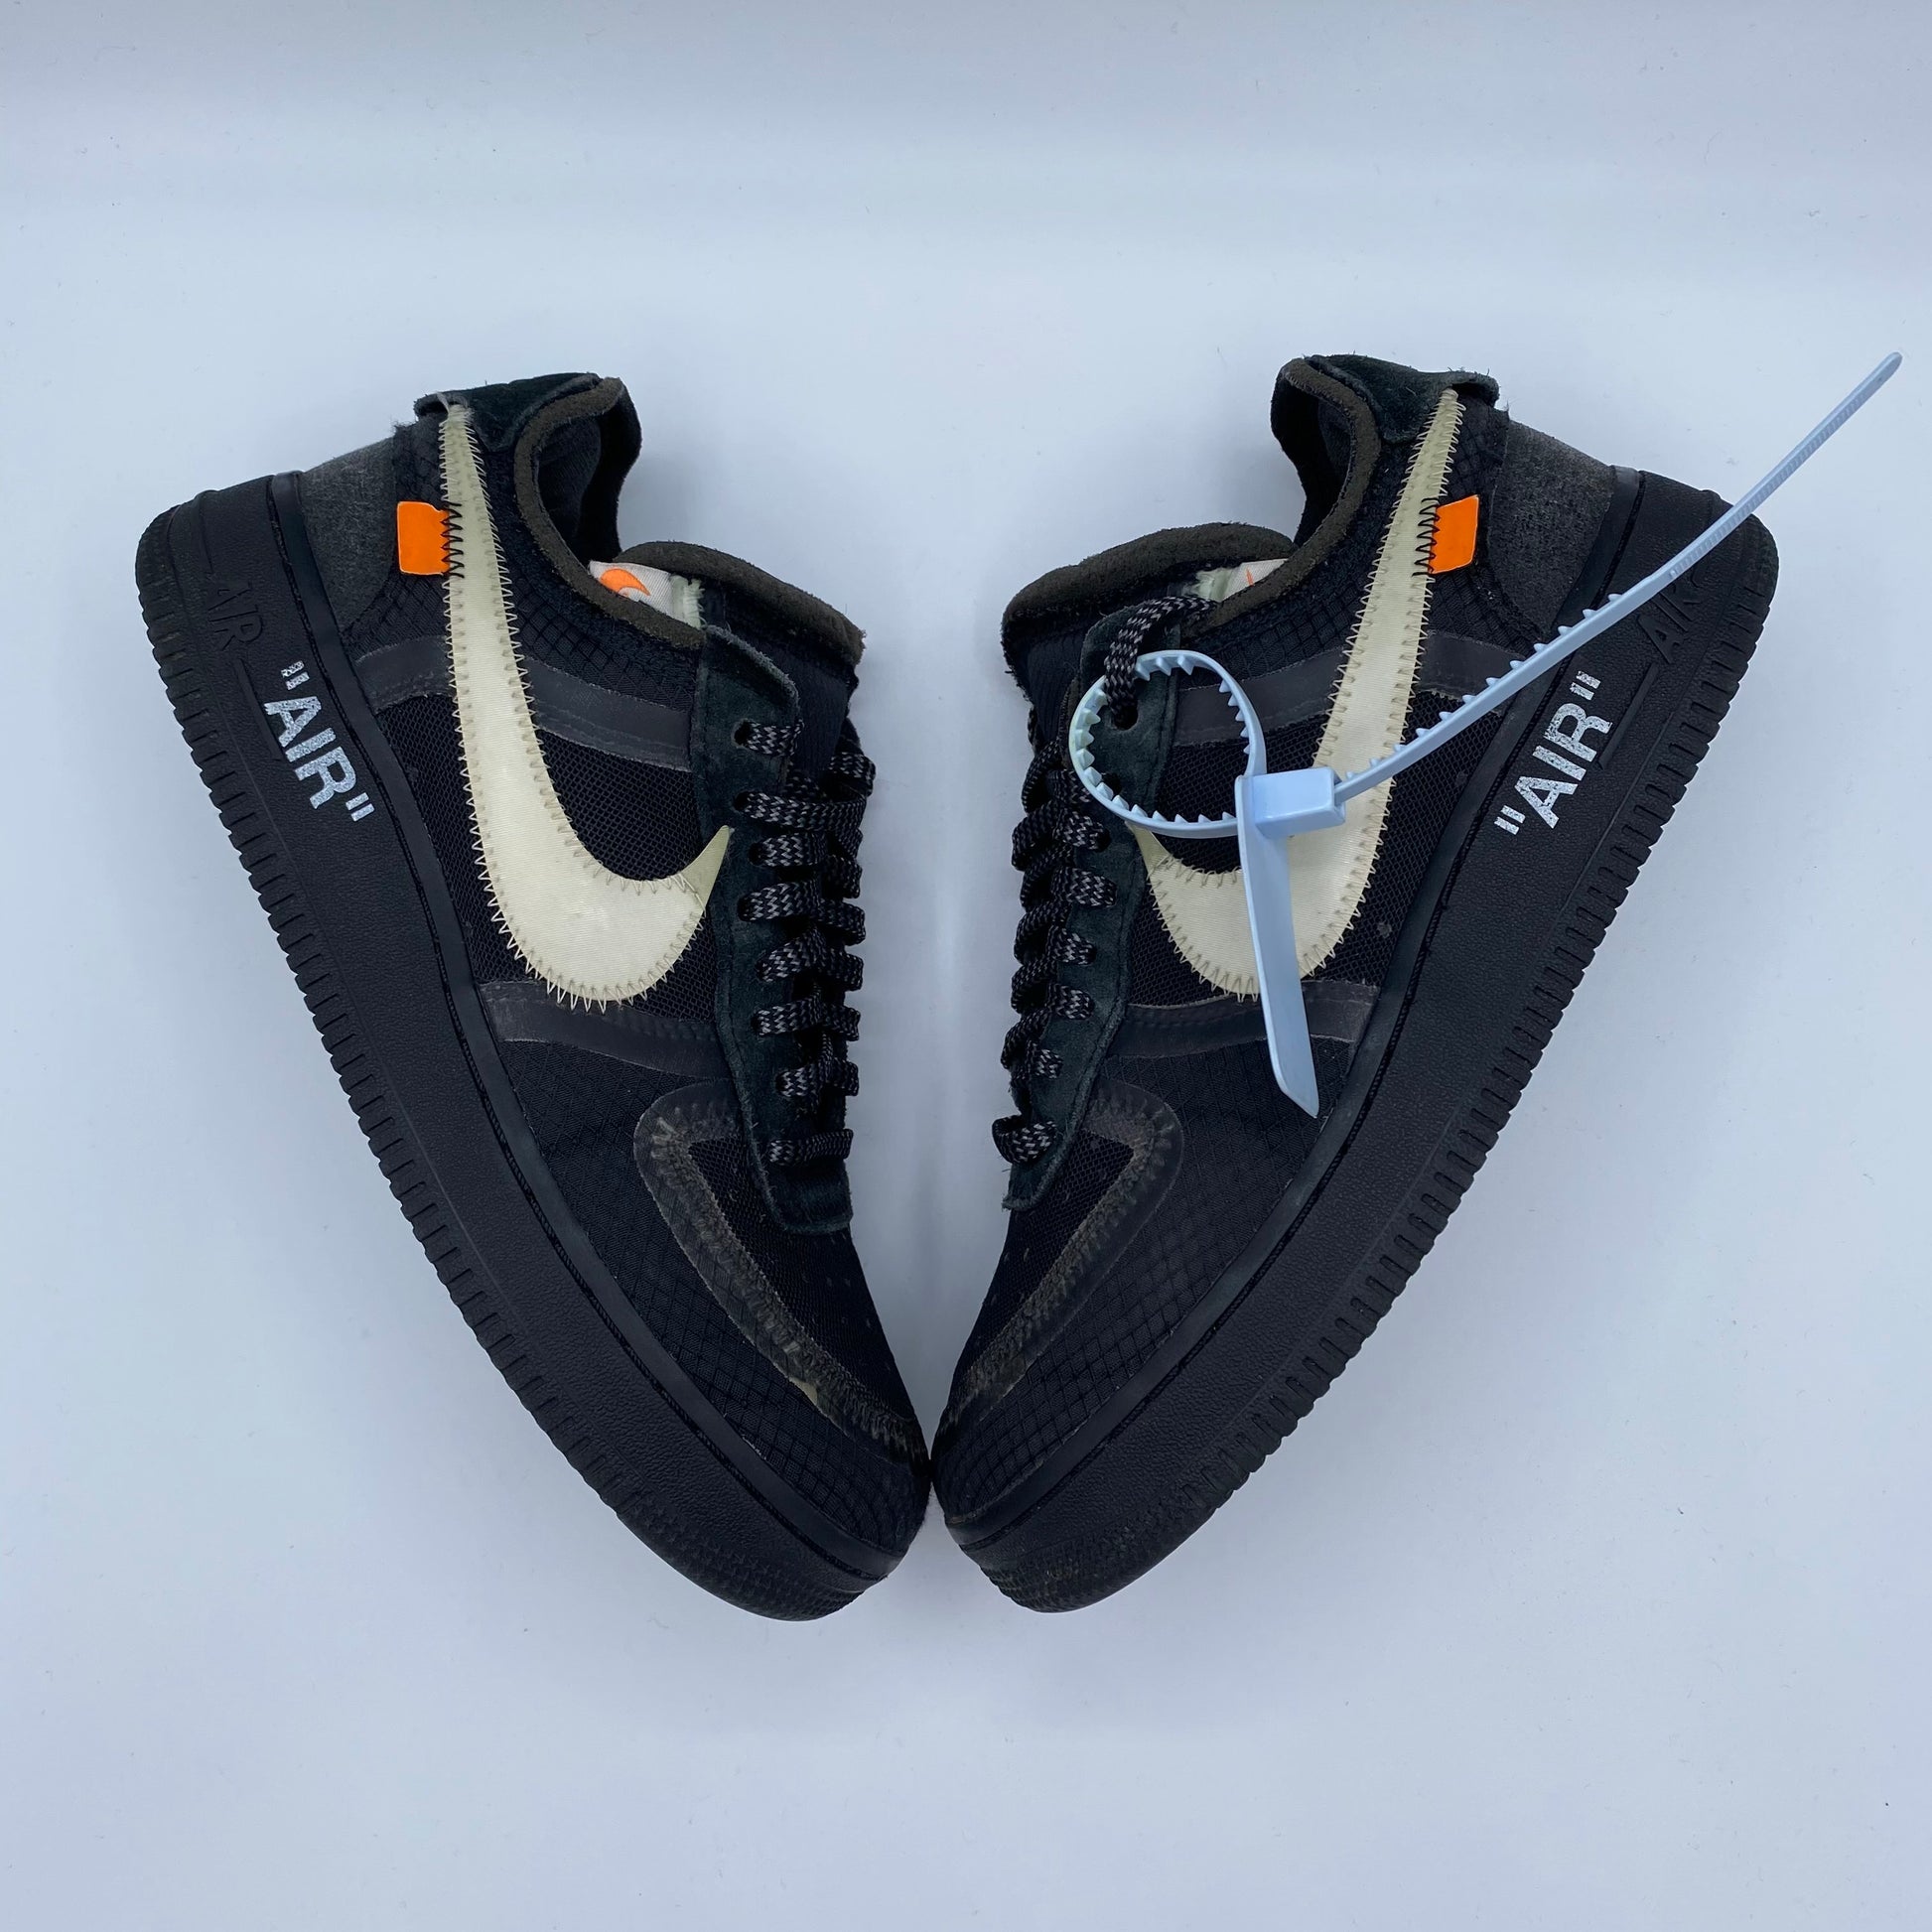 Nike Air Force 1 Low Off-White Black